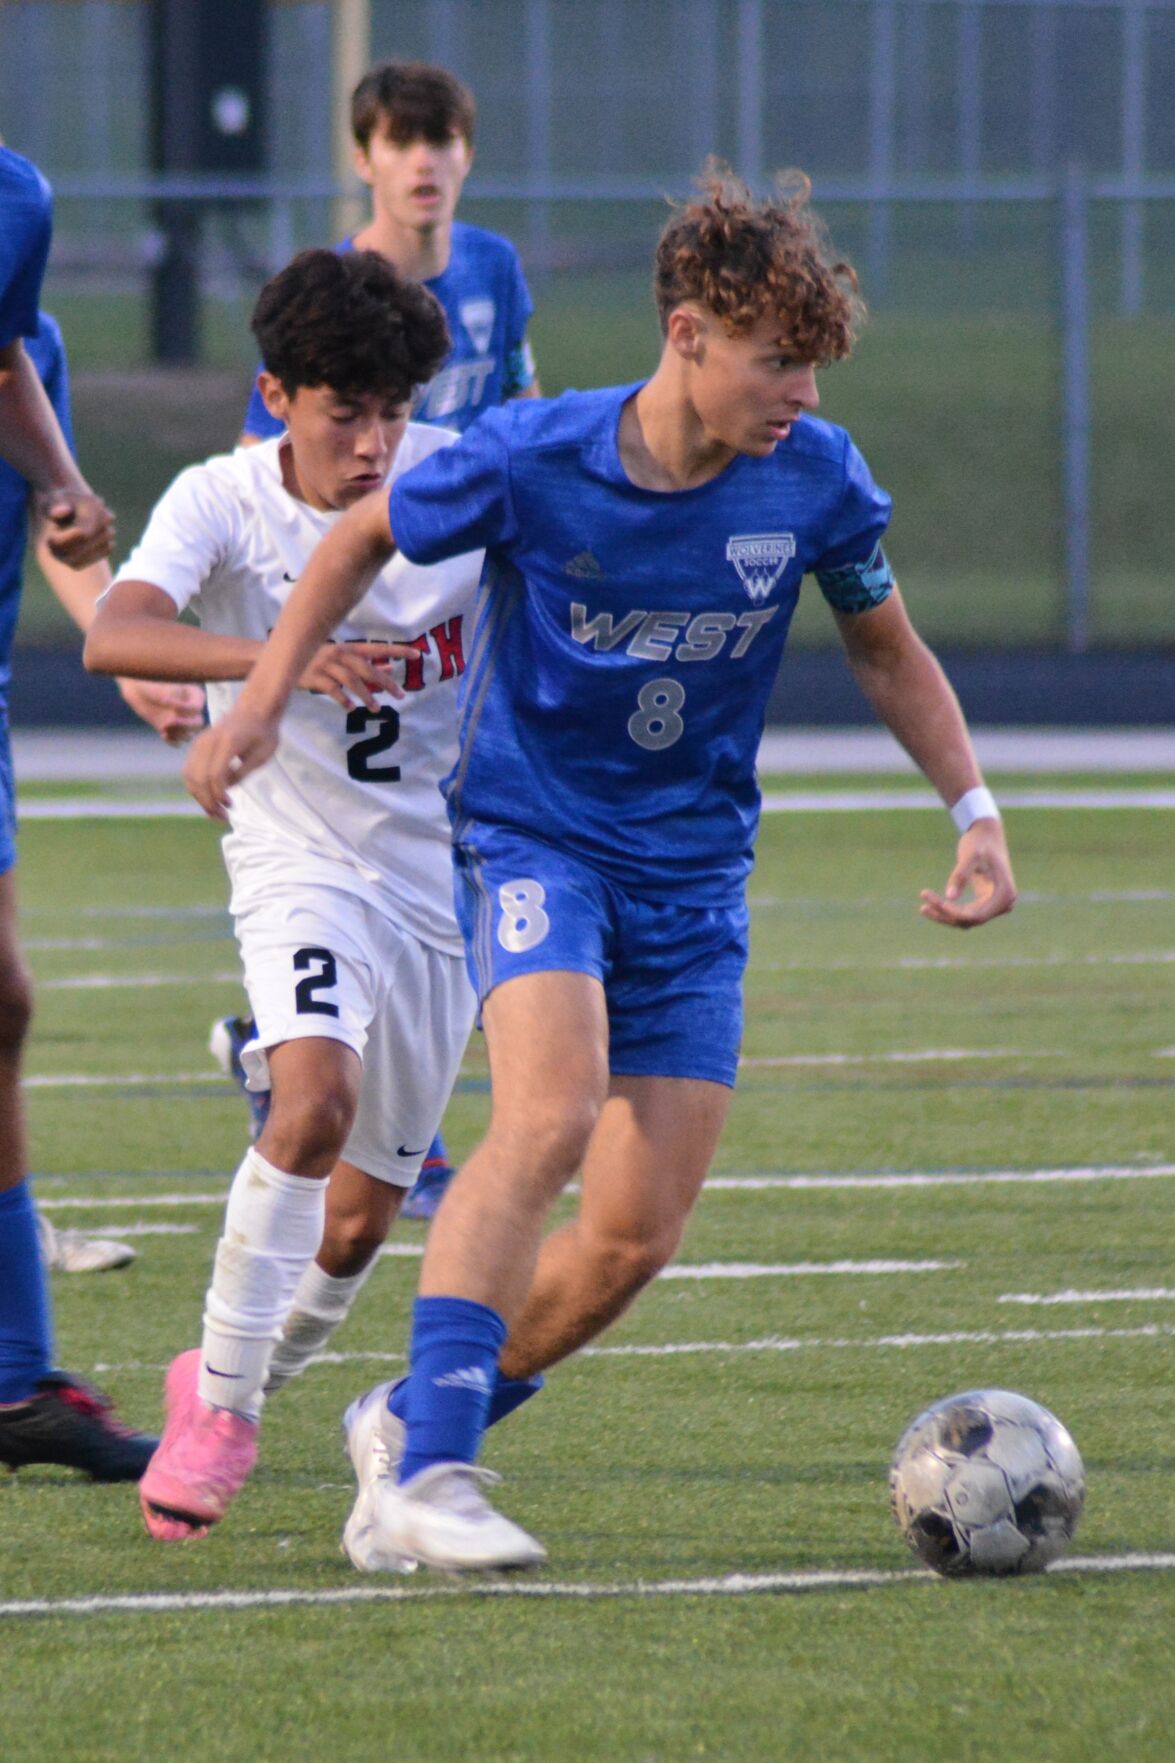 Waukesha South triumphs over Waukesha West in a thrilling 2-1 victory